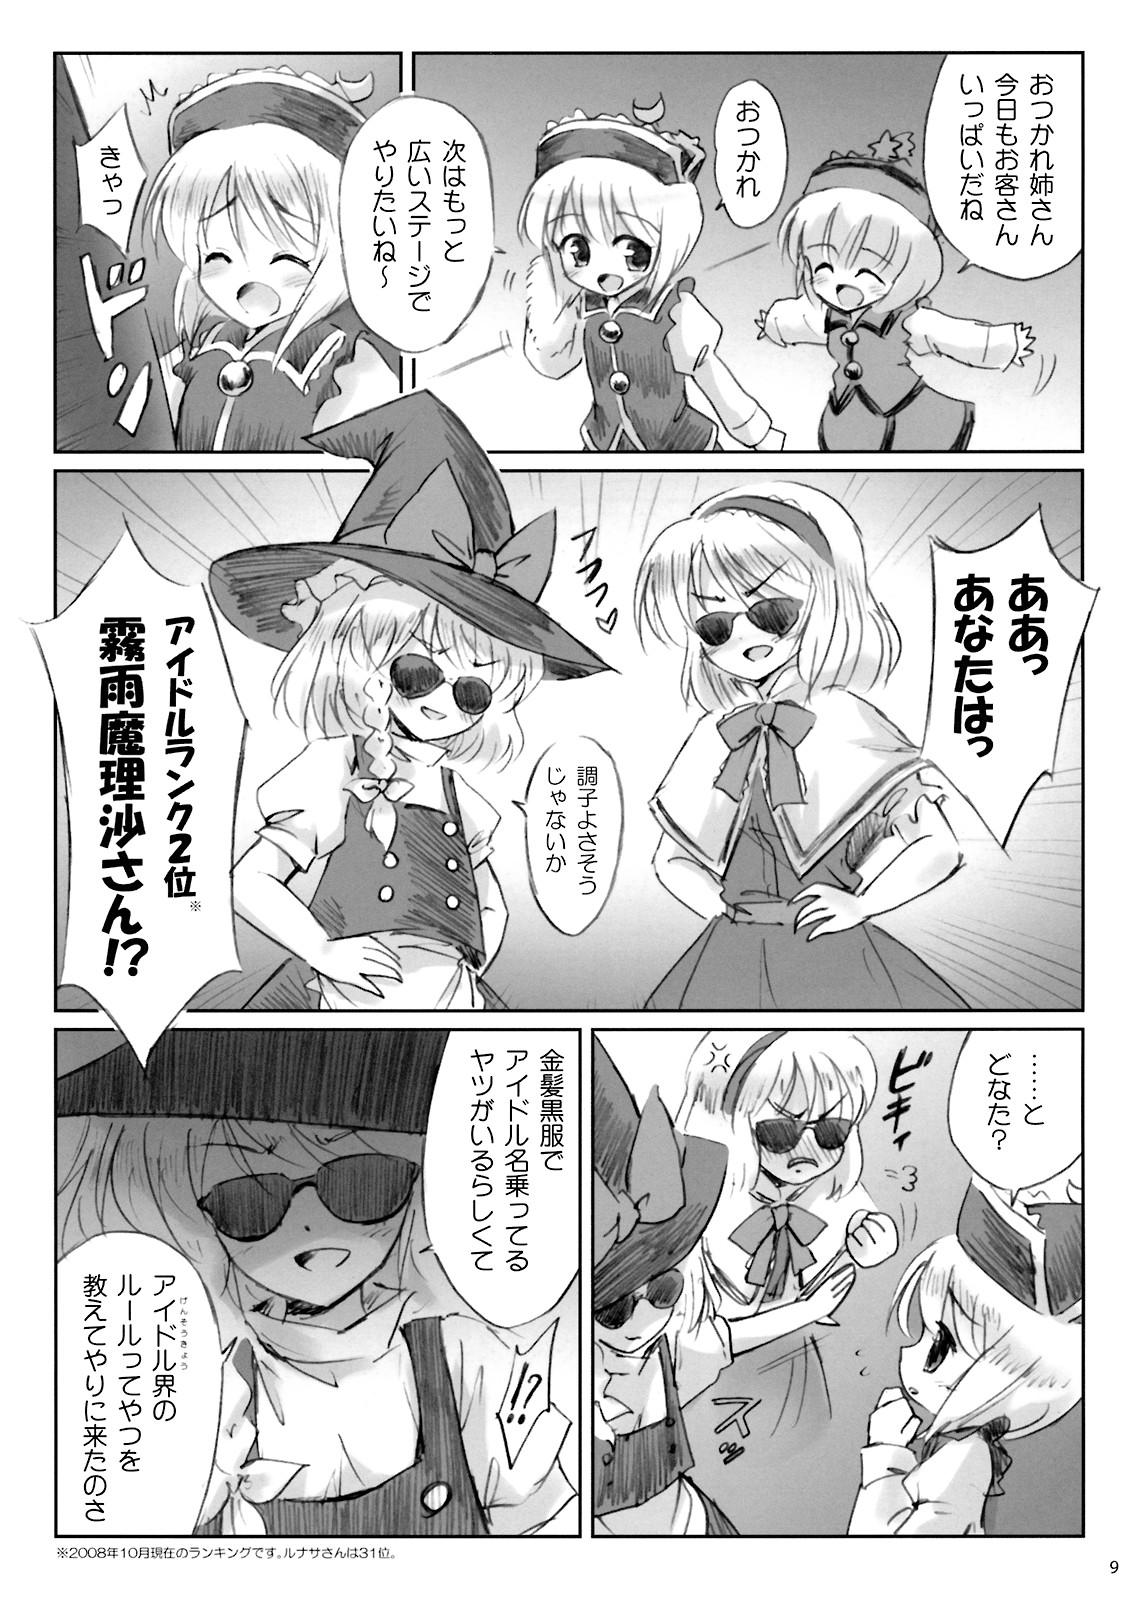 Whores IDOLMASTER - Touhou project Tit - Page 8